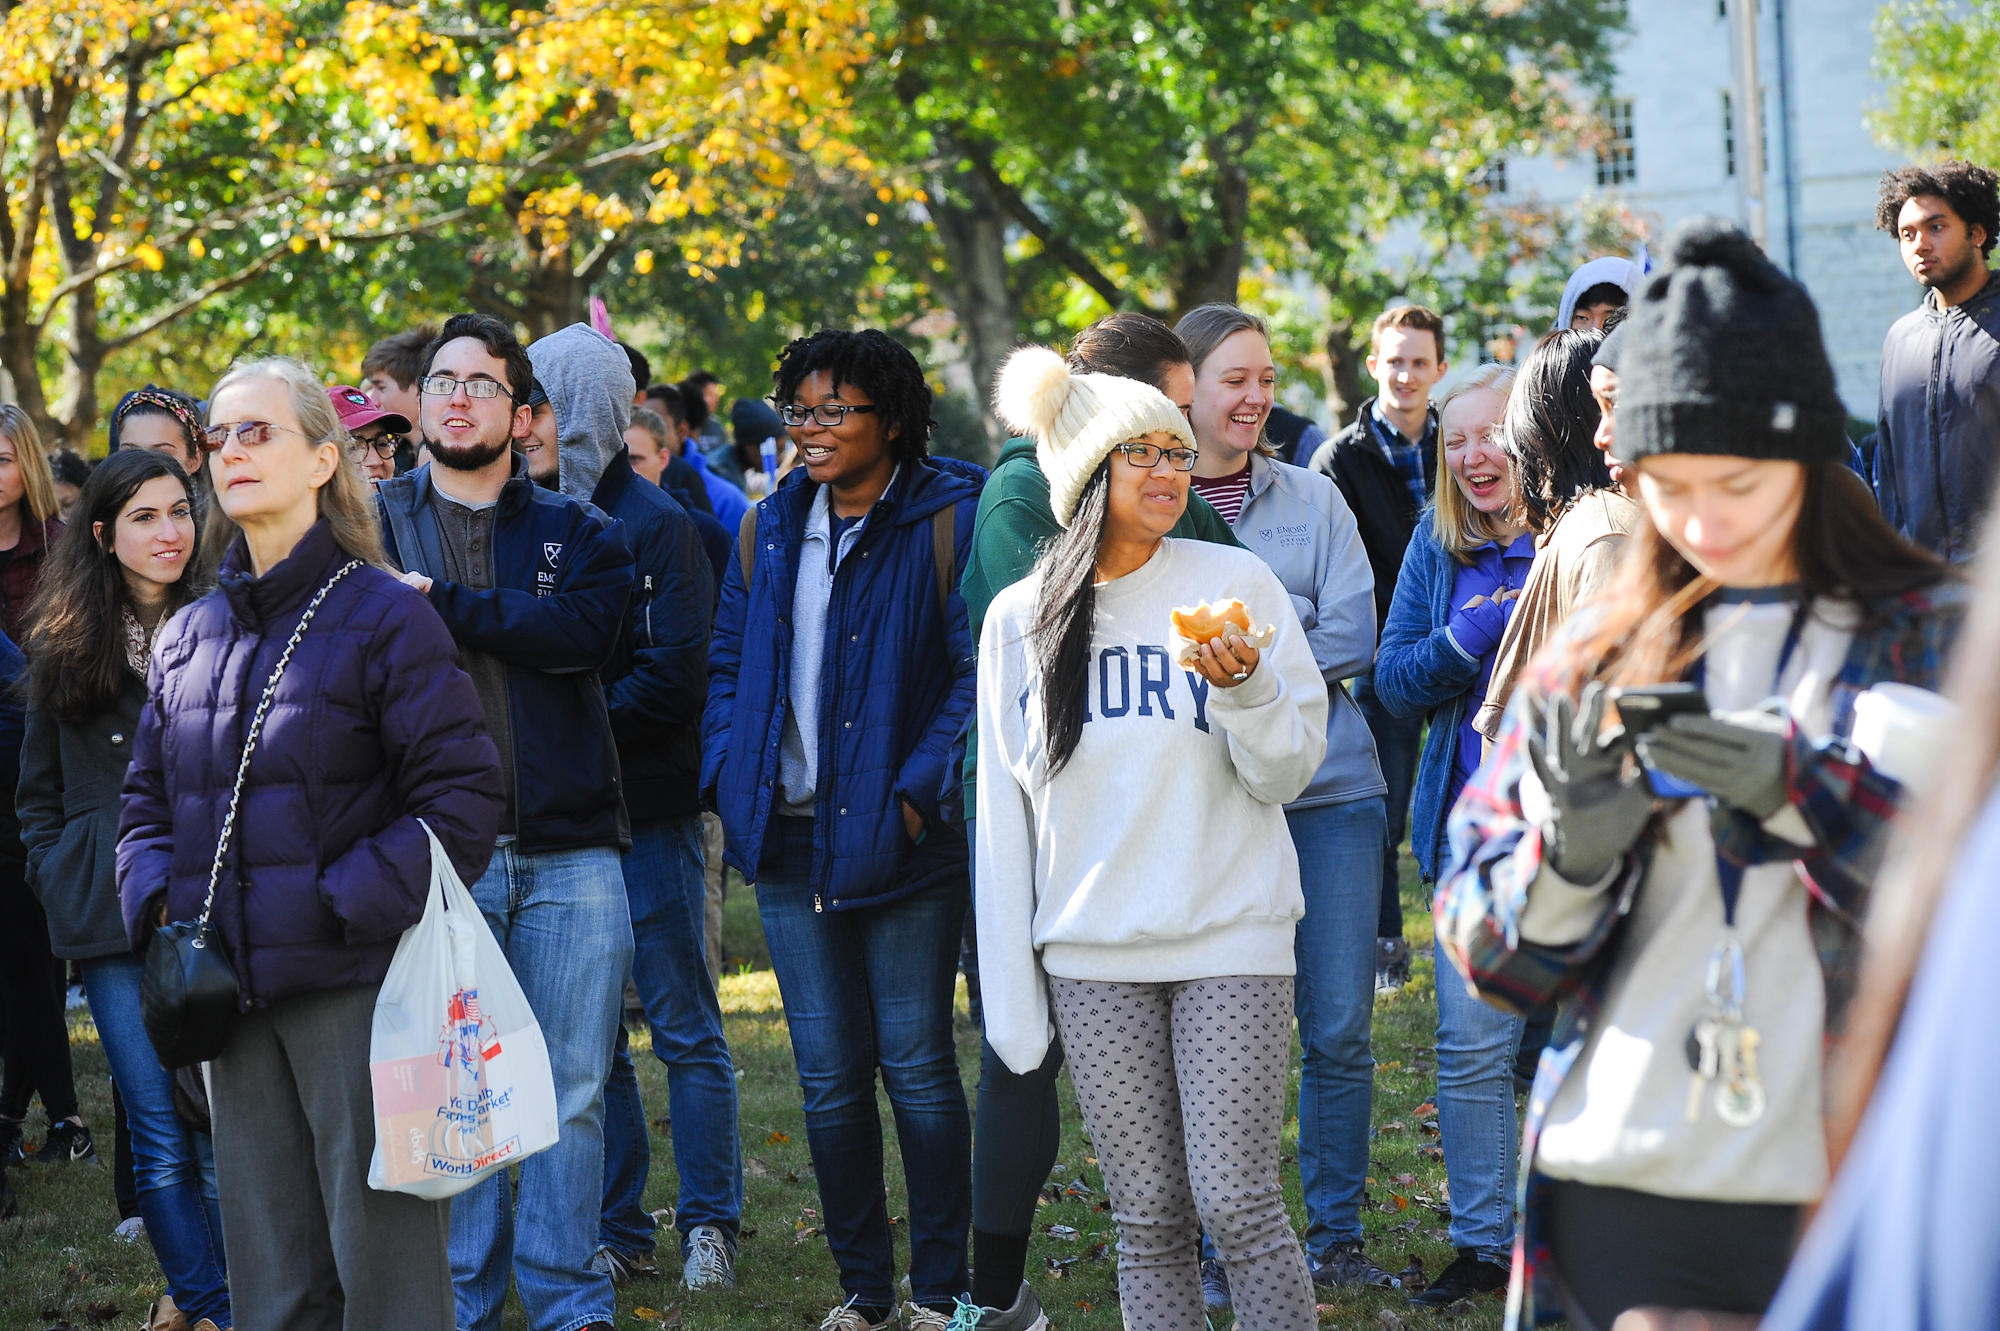 Students gather on the quad before heading out